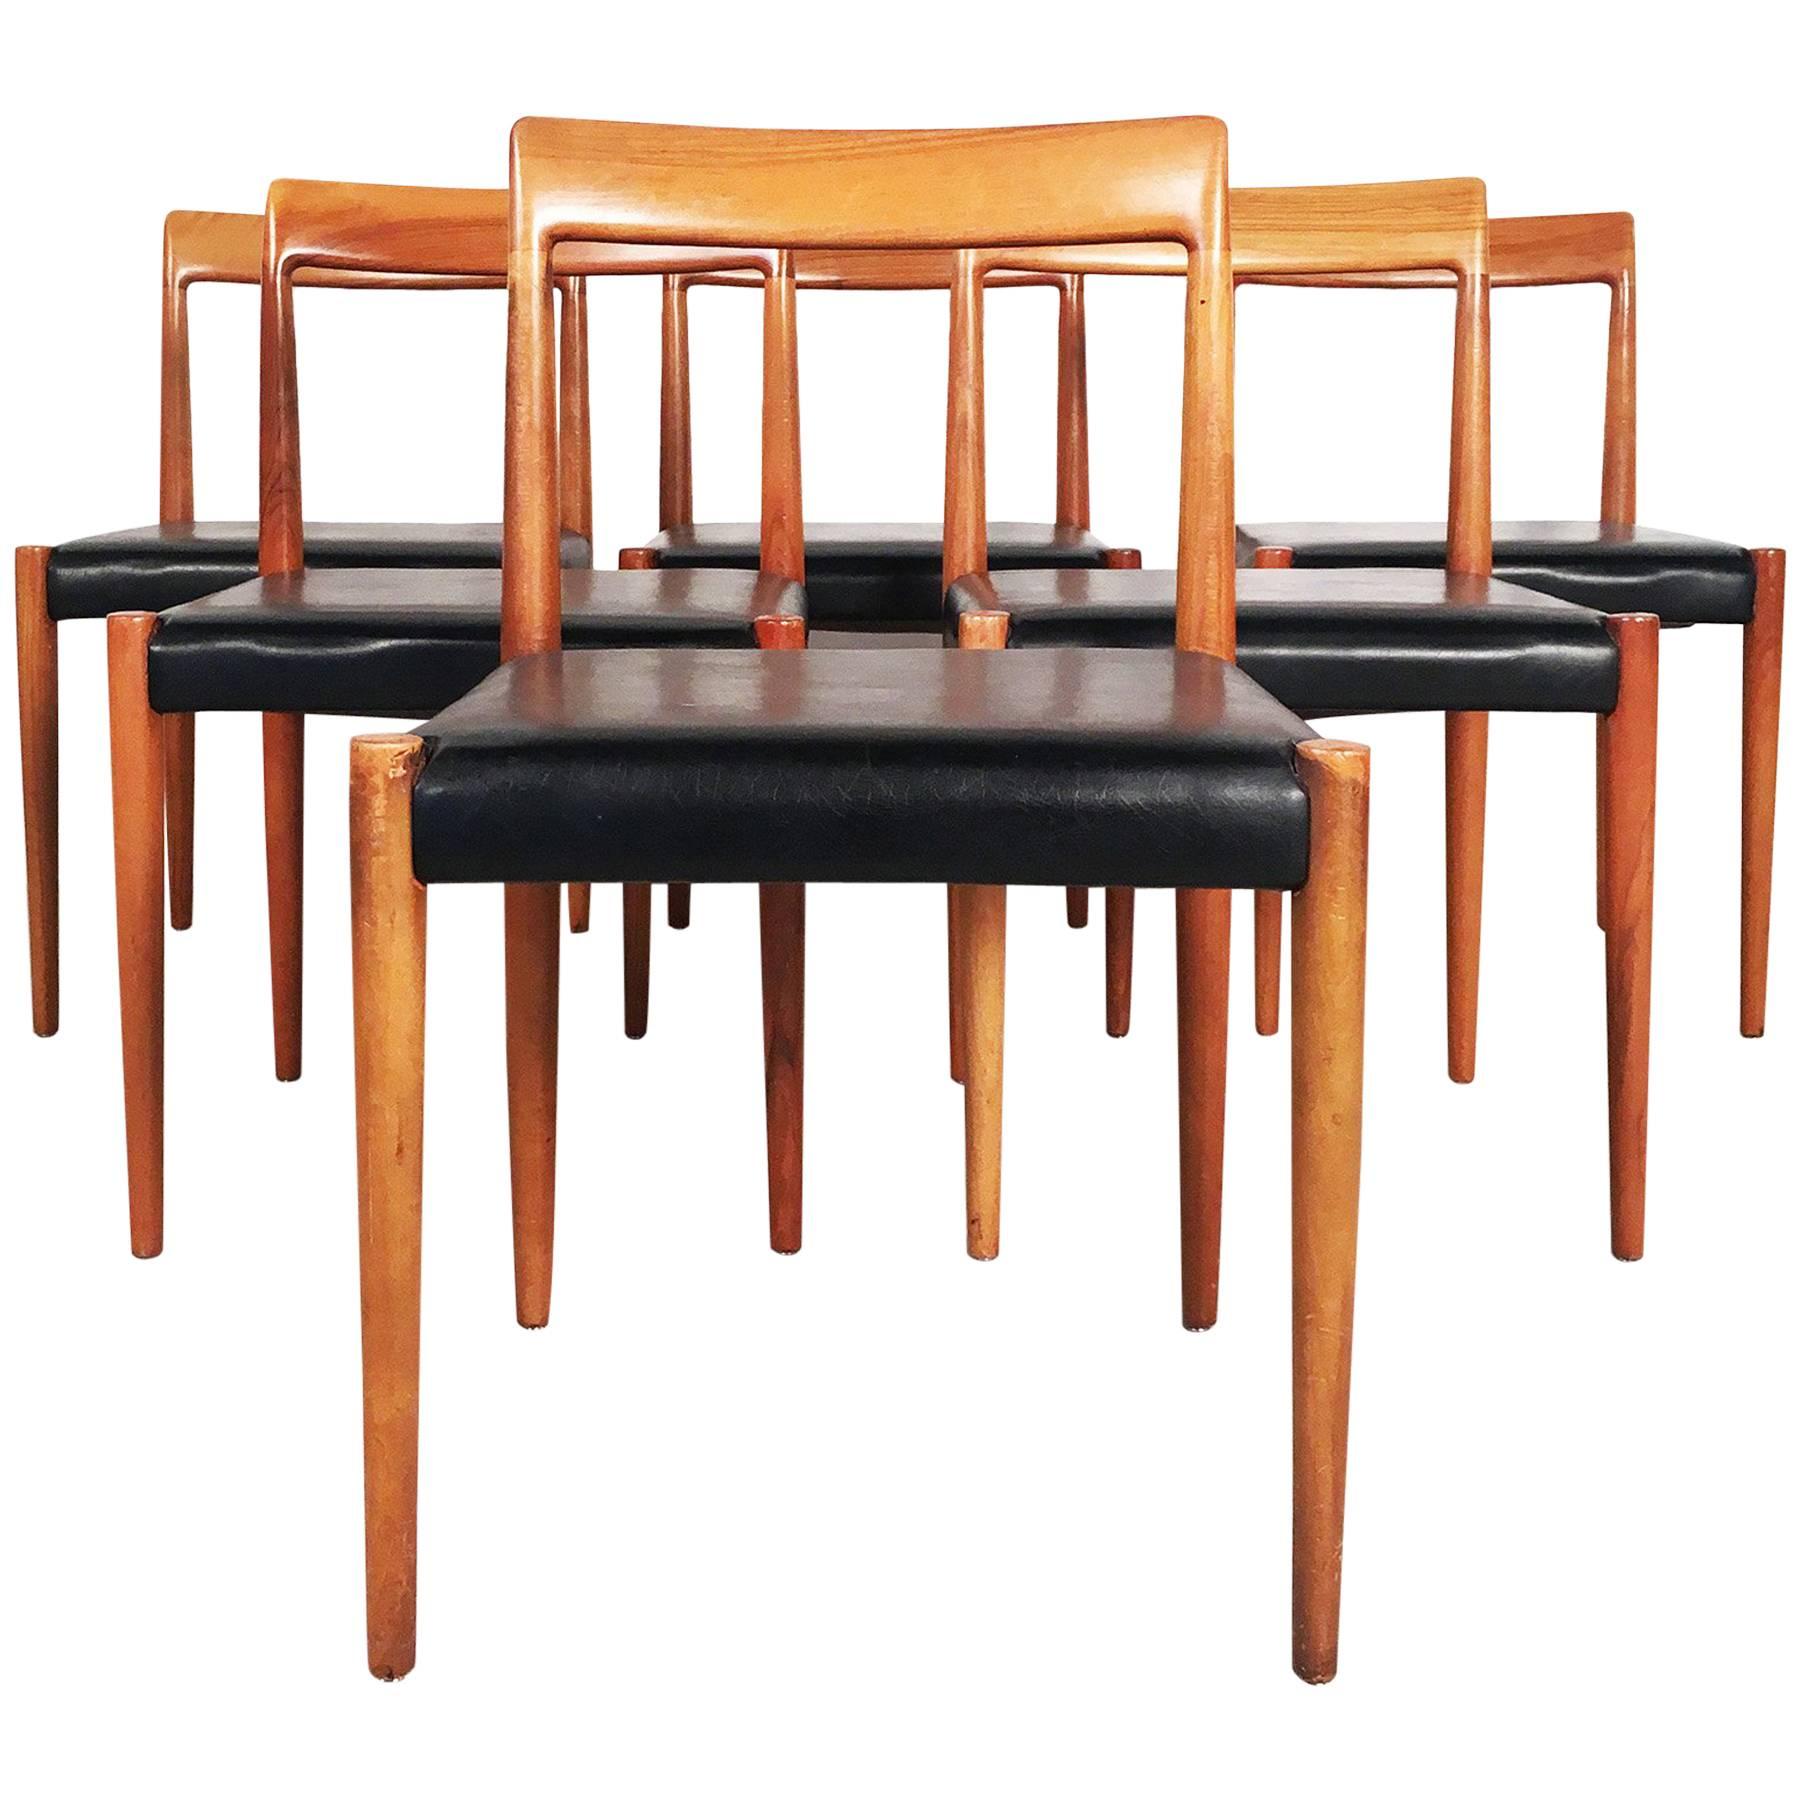 Six Dining Chairs from the 1960s, Manufactured by Lübke